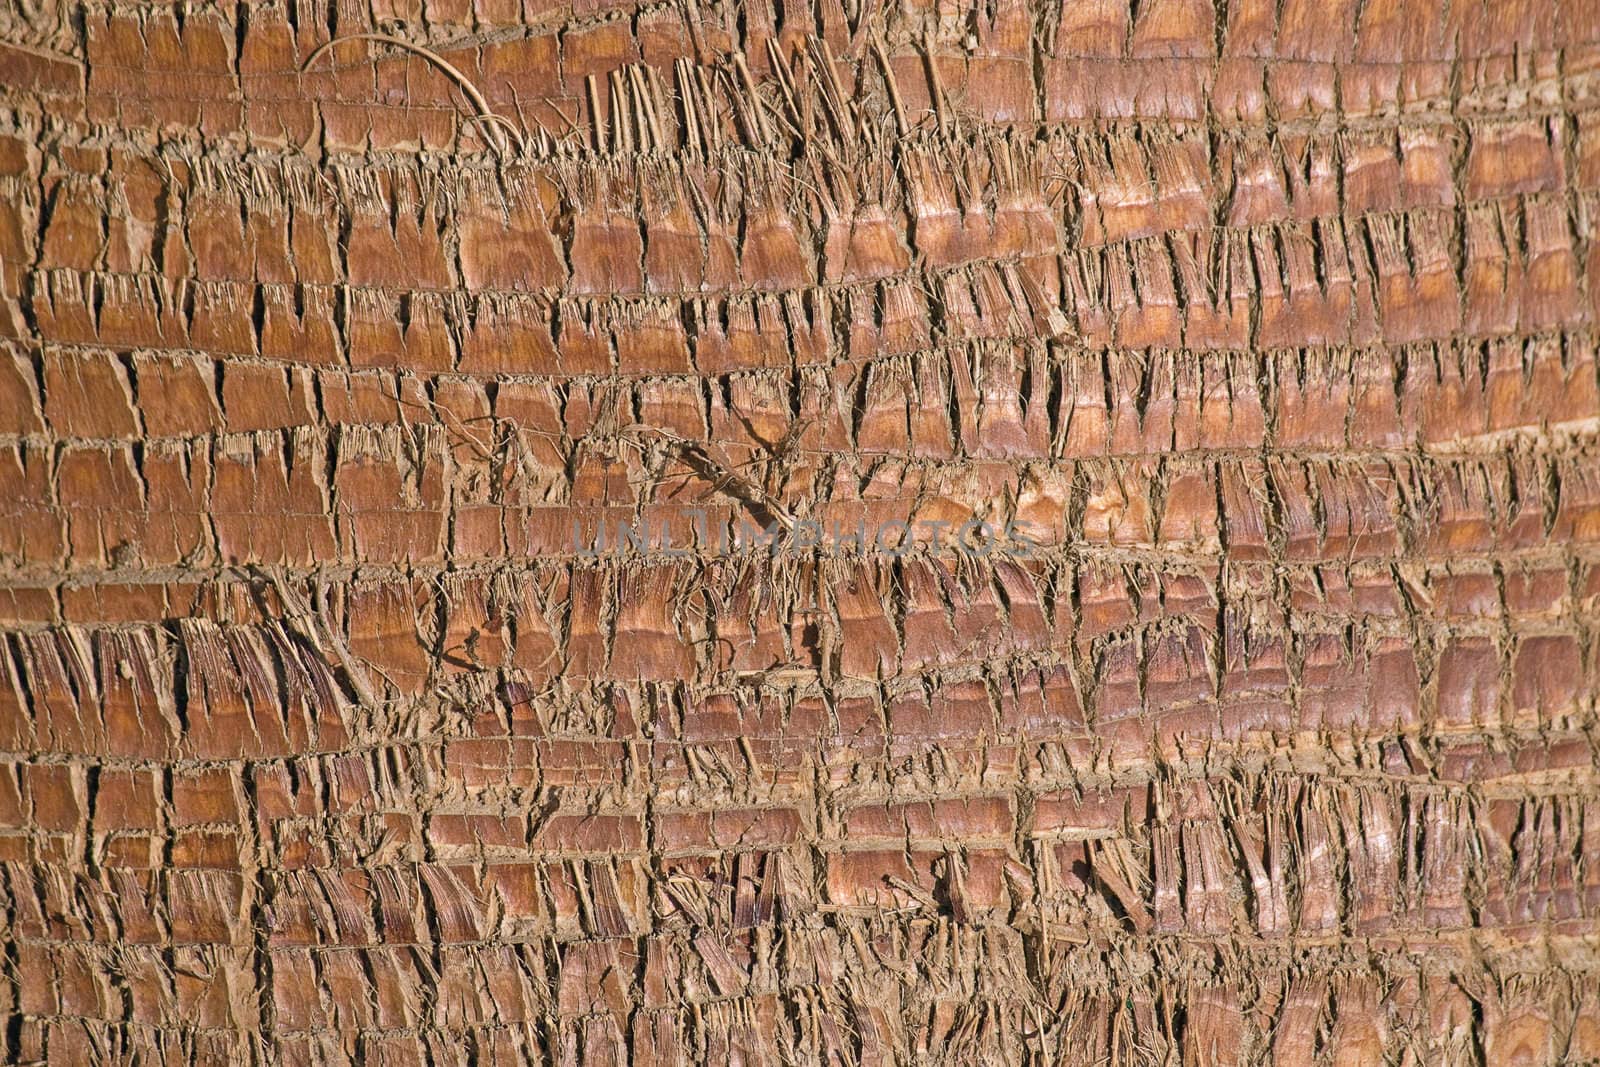 This unusual and interesting background is the pattern on the trunk of a palm tree.